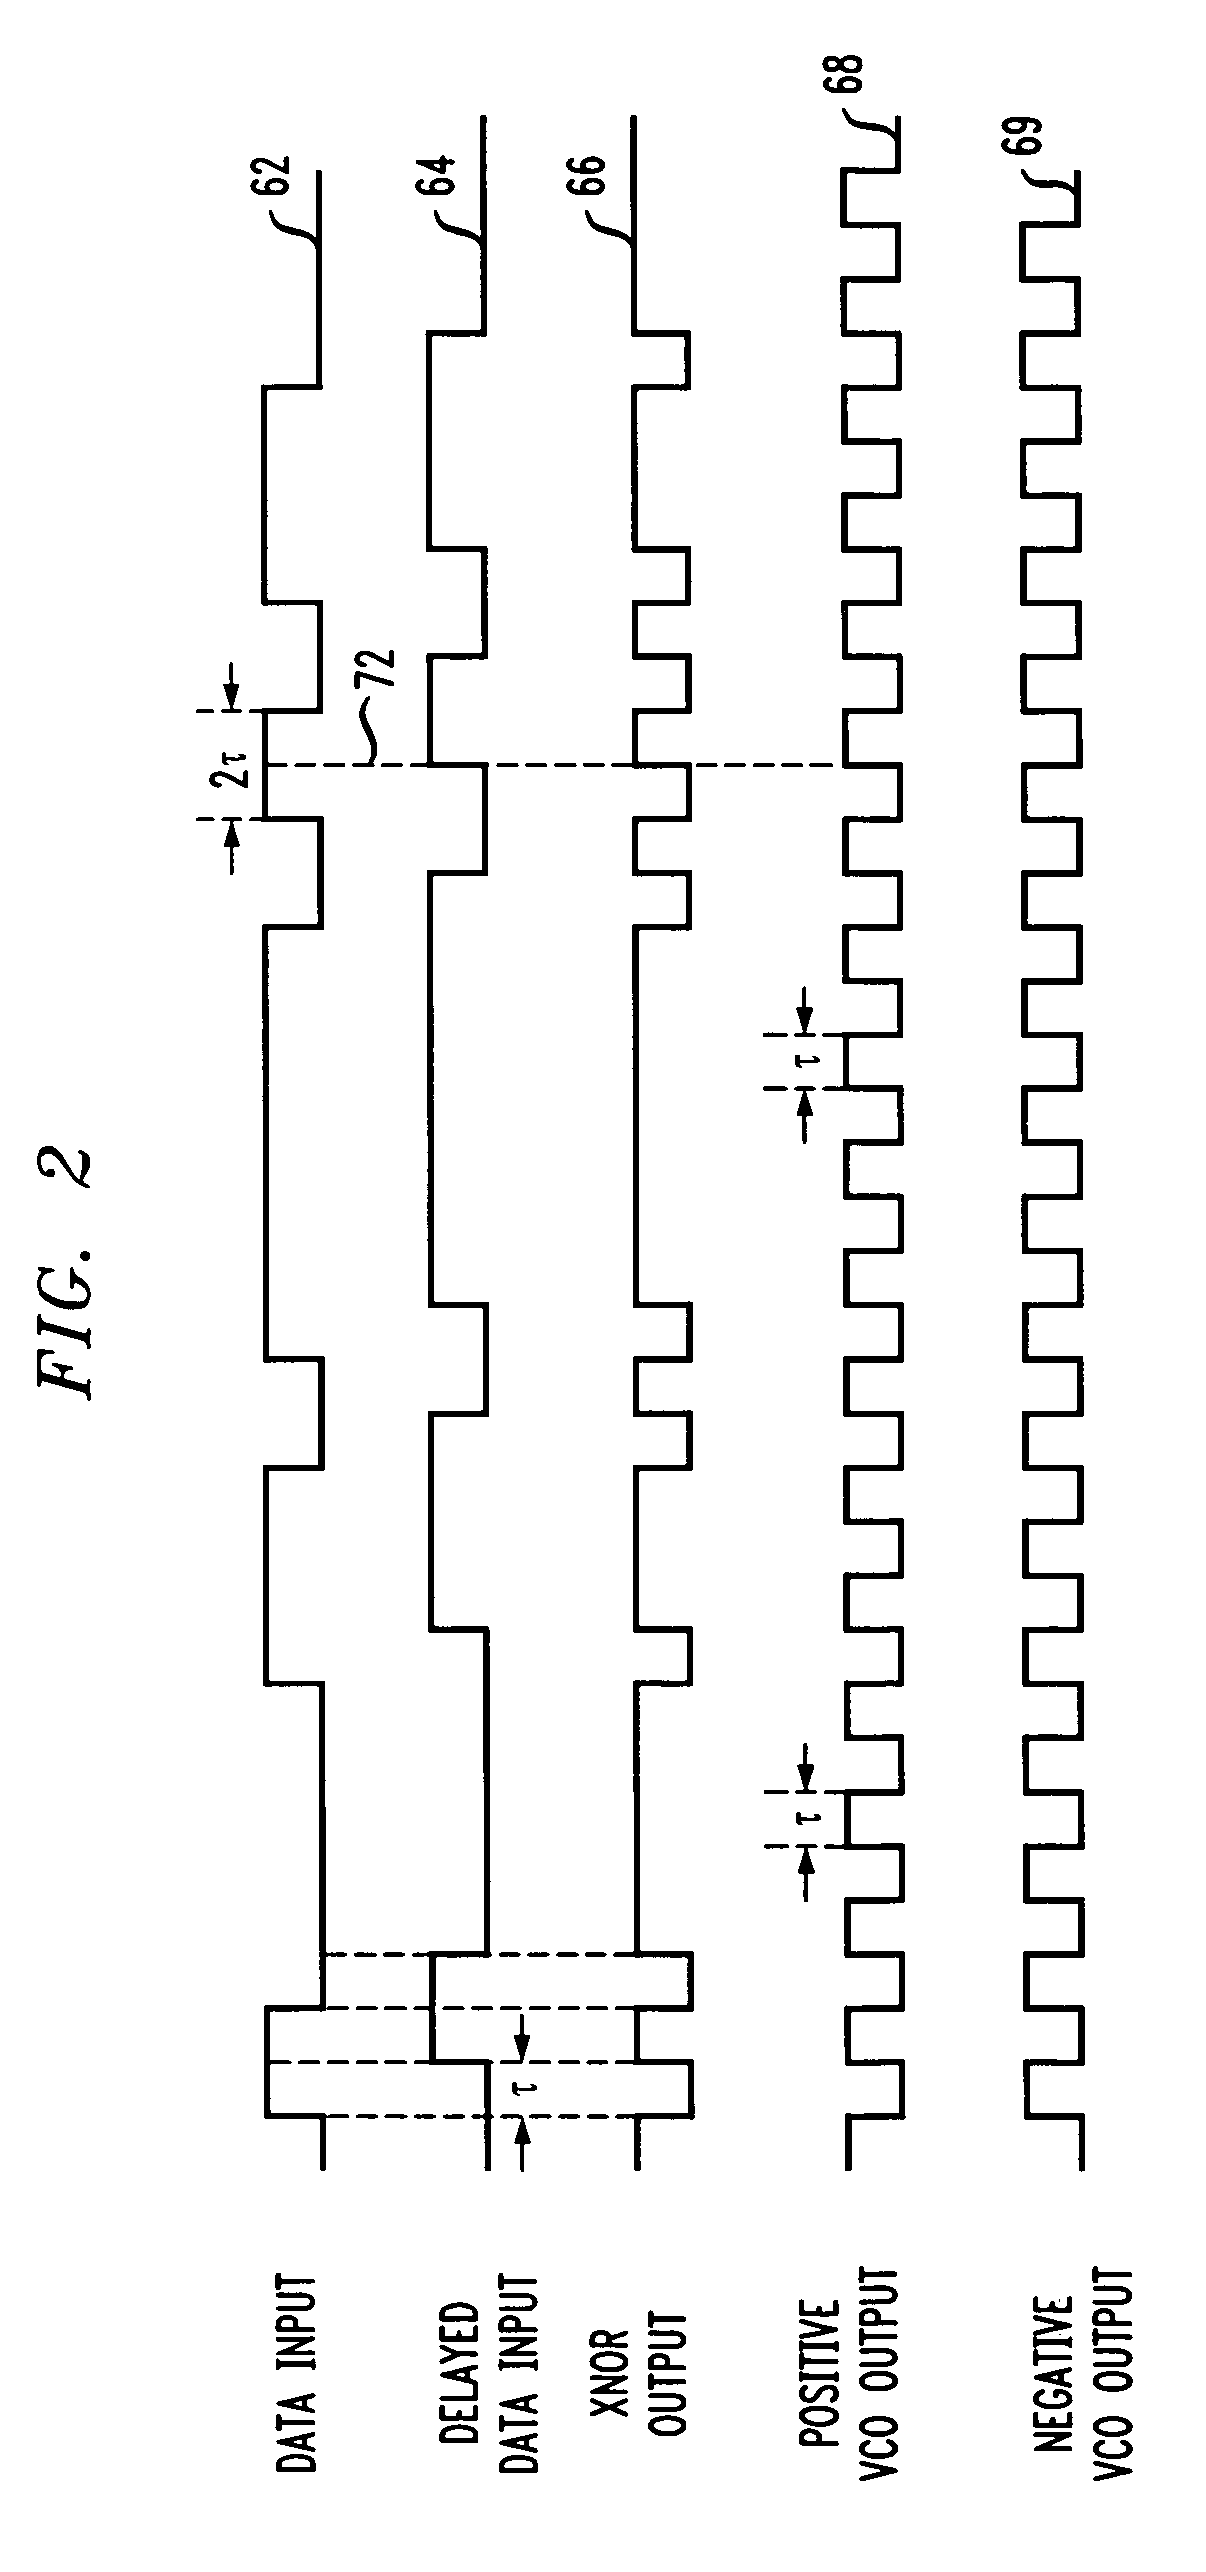 Apparatus and method for calibrating the frequency of a clock and data recovery circuit